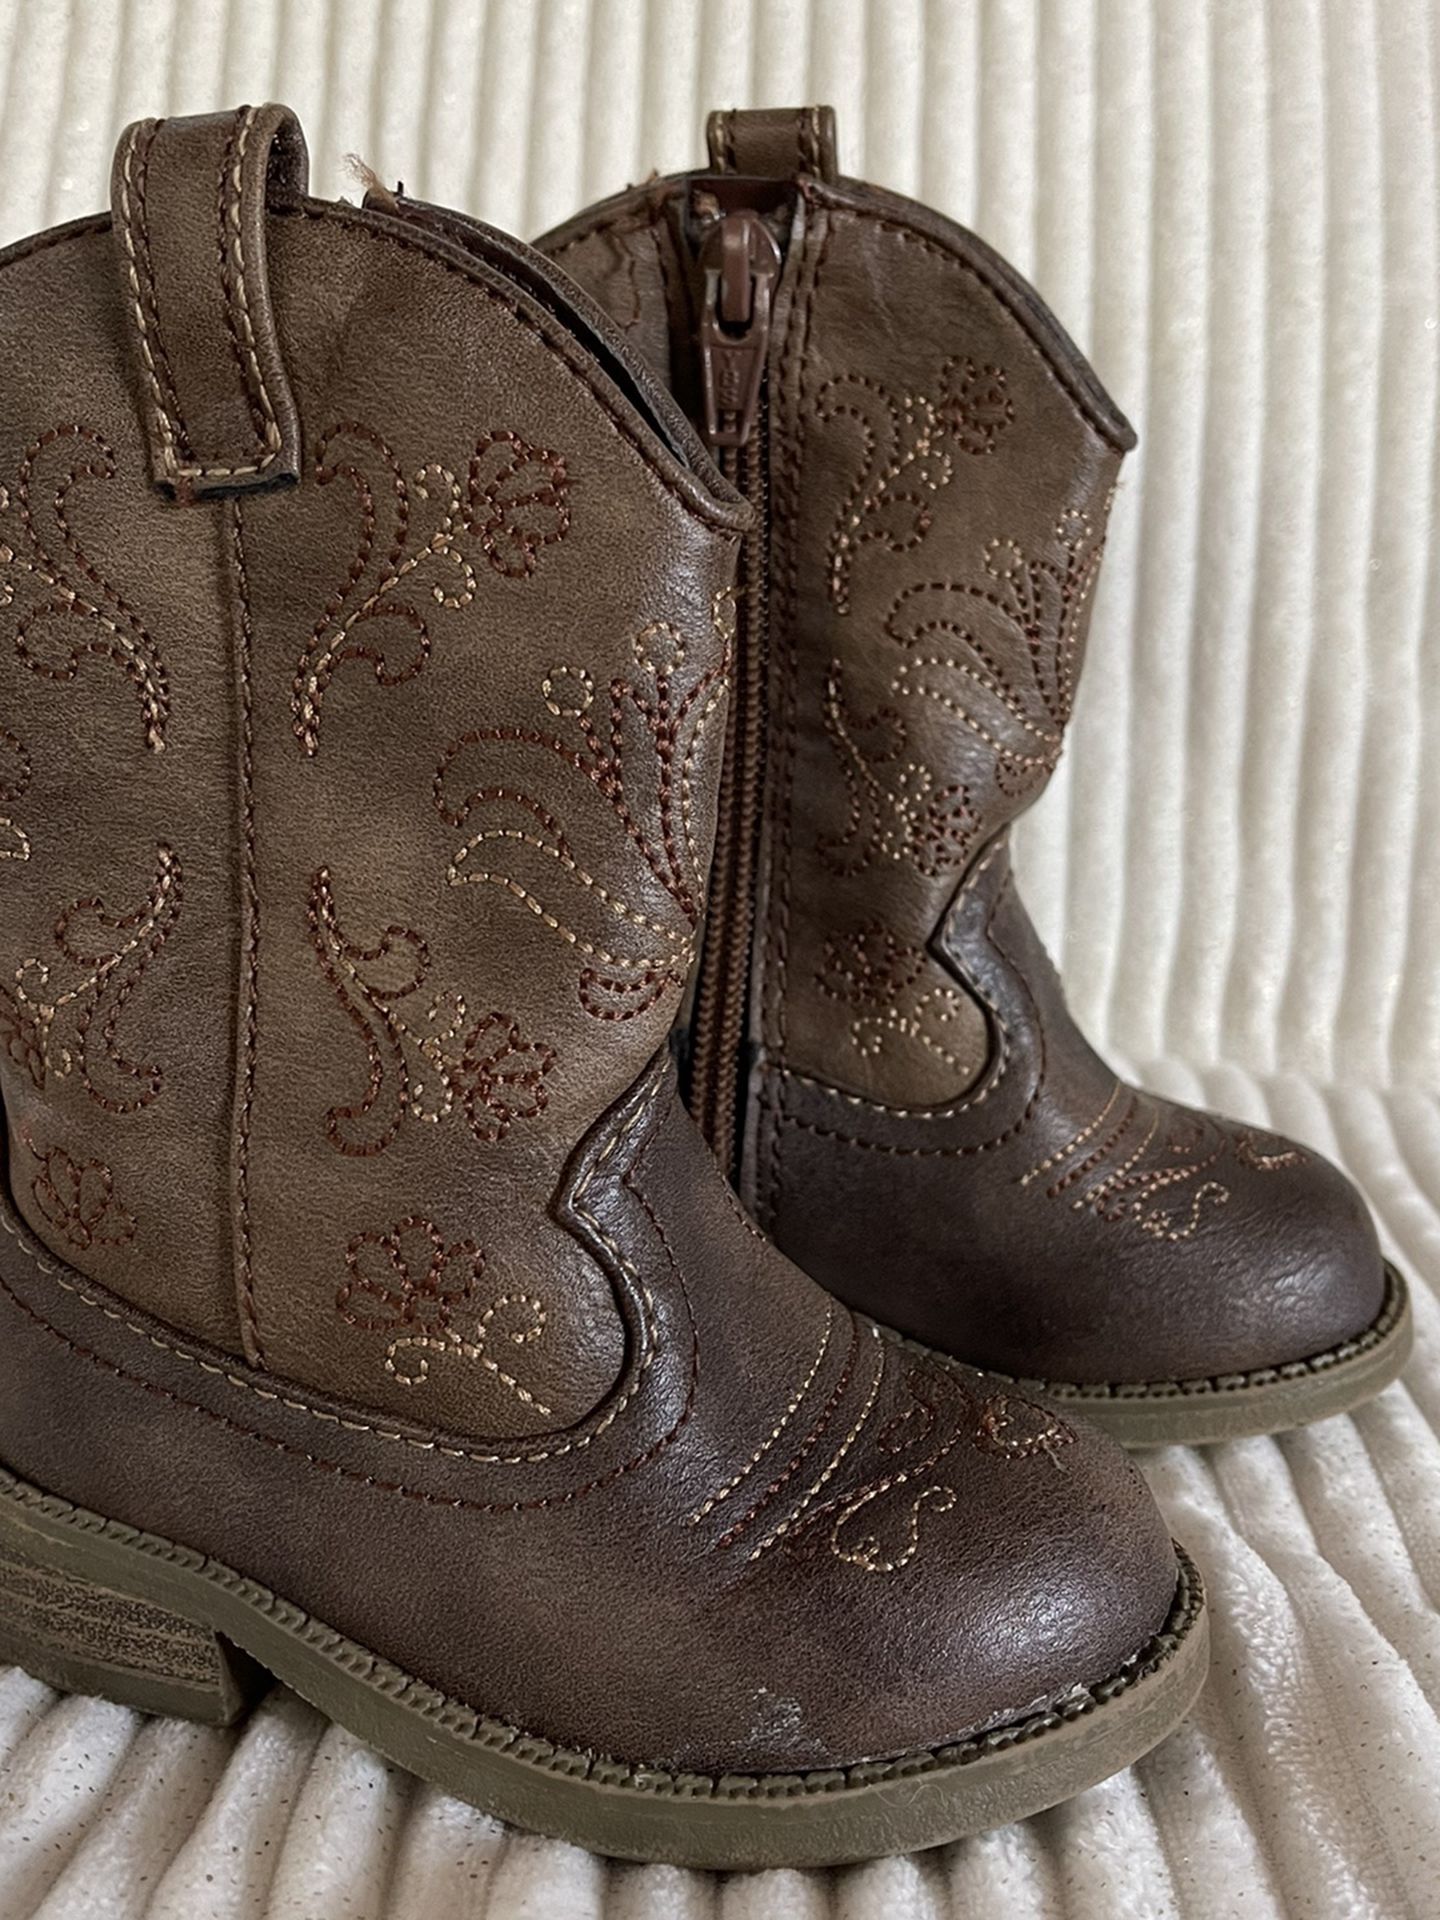 Cowboy Boots Size 5 Baby/ Toddler